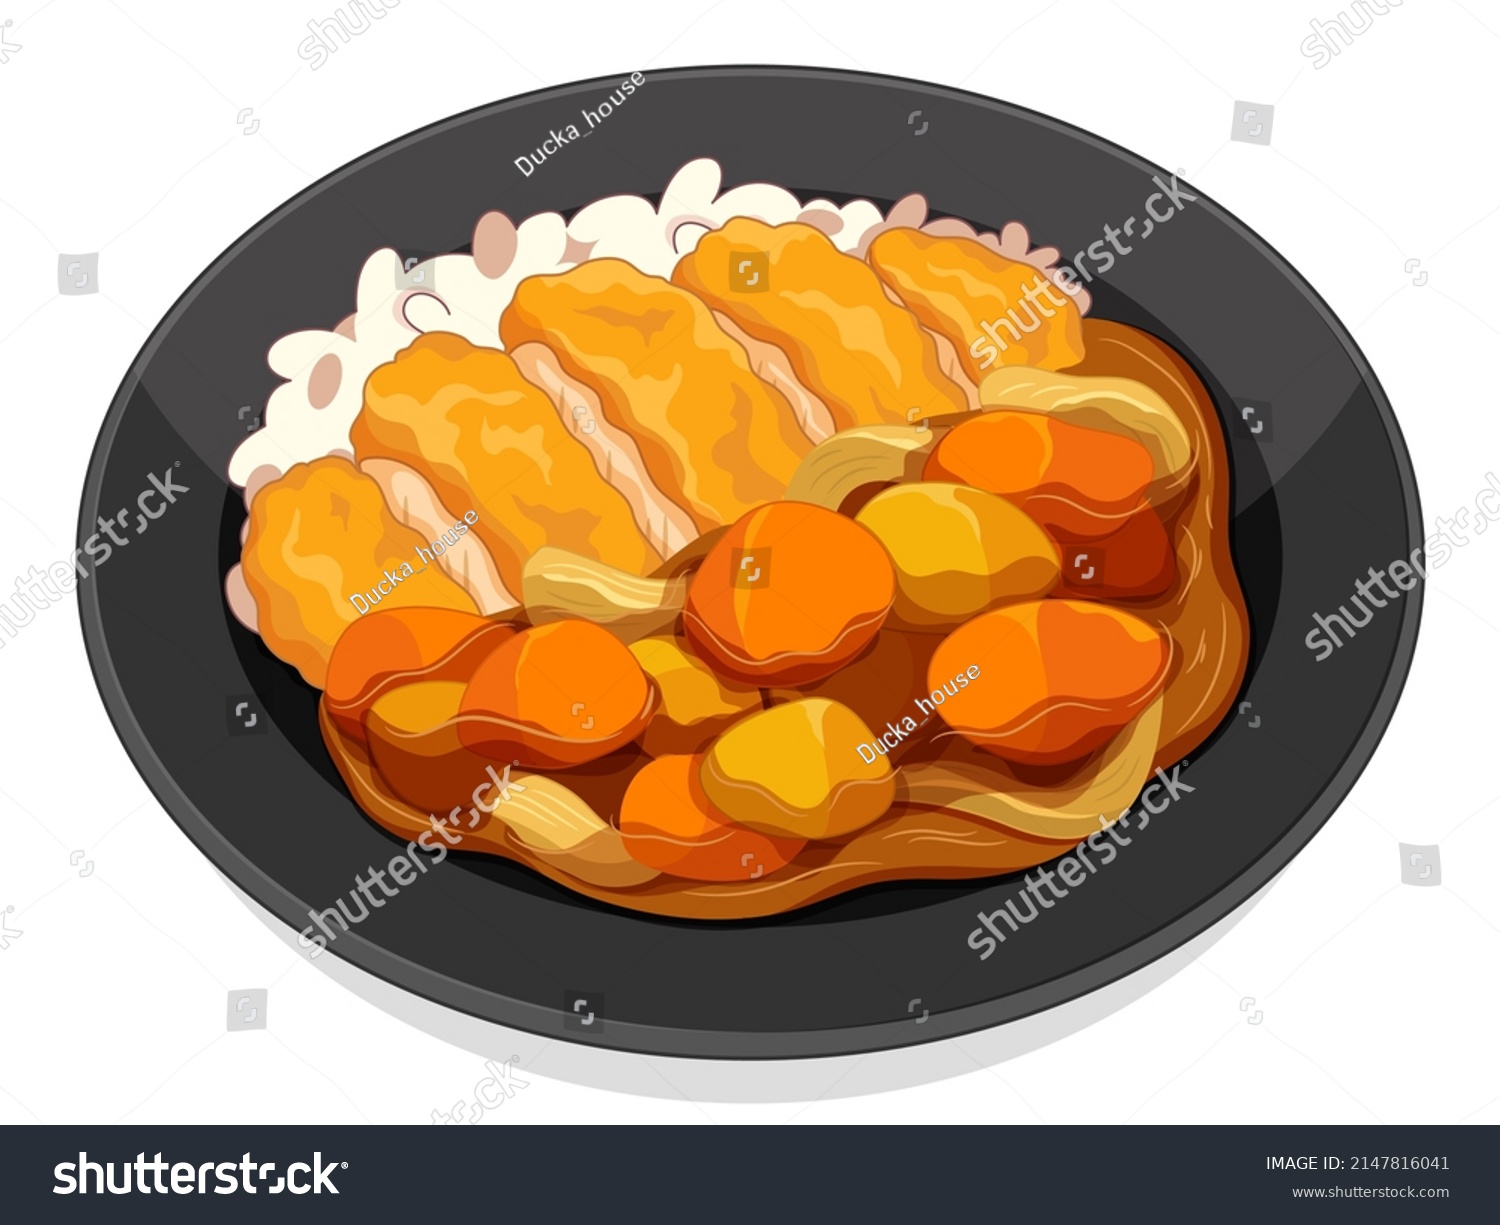 SVG of Japanese katsu curry with rice illustration vector.
(Chicken curry recipe menu) svg